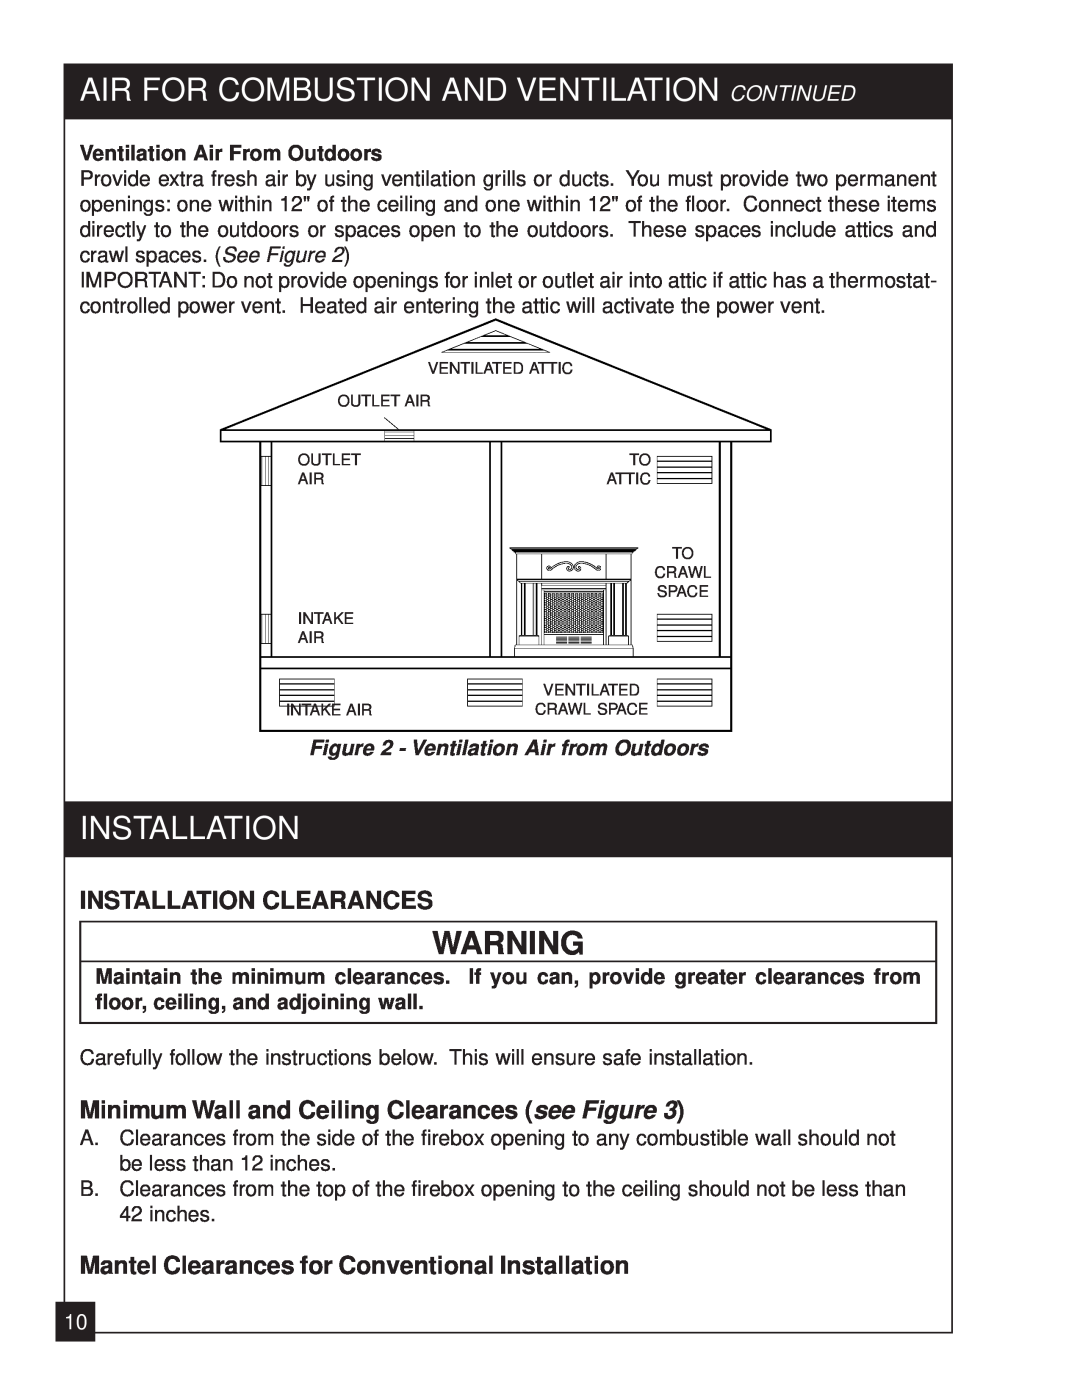 United States Stove 2020L installation manual Installation Clearances, Minimum Wall and Ceiling Clearances see Figure 